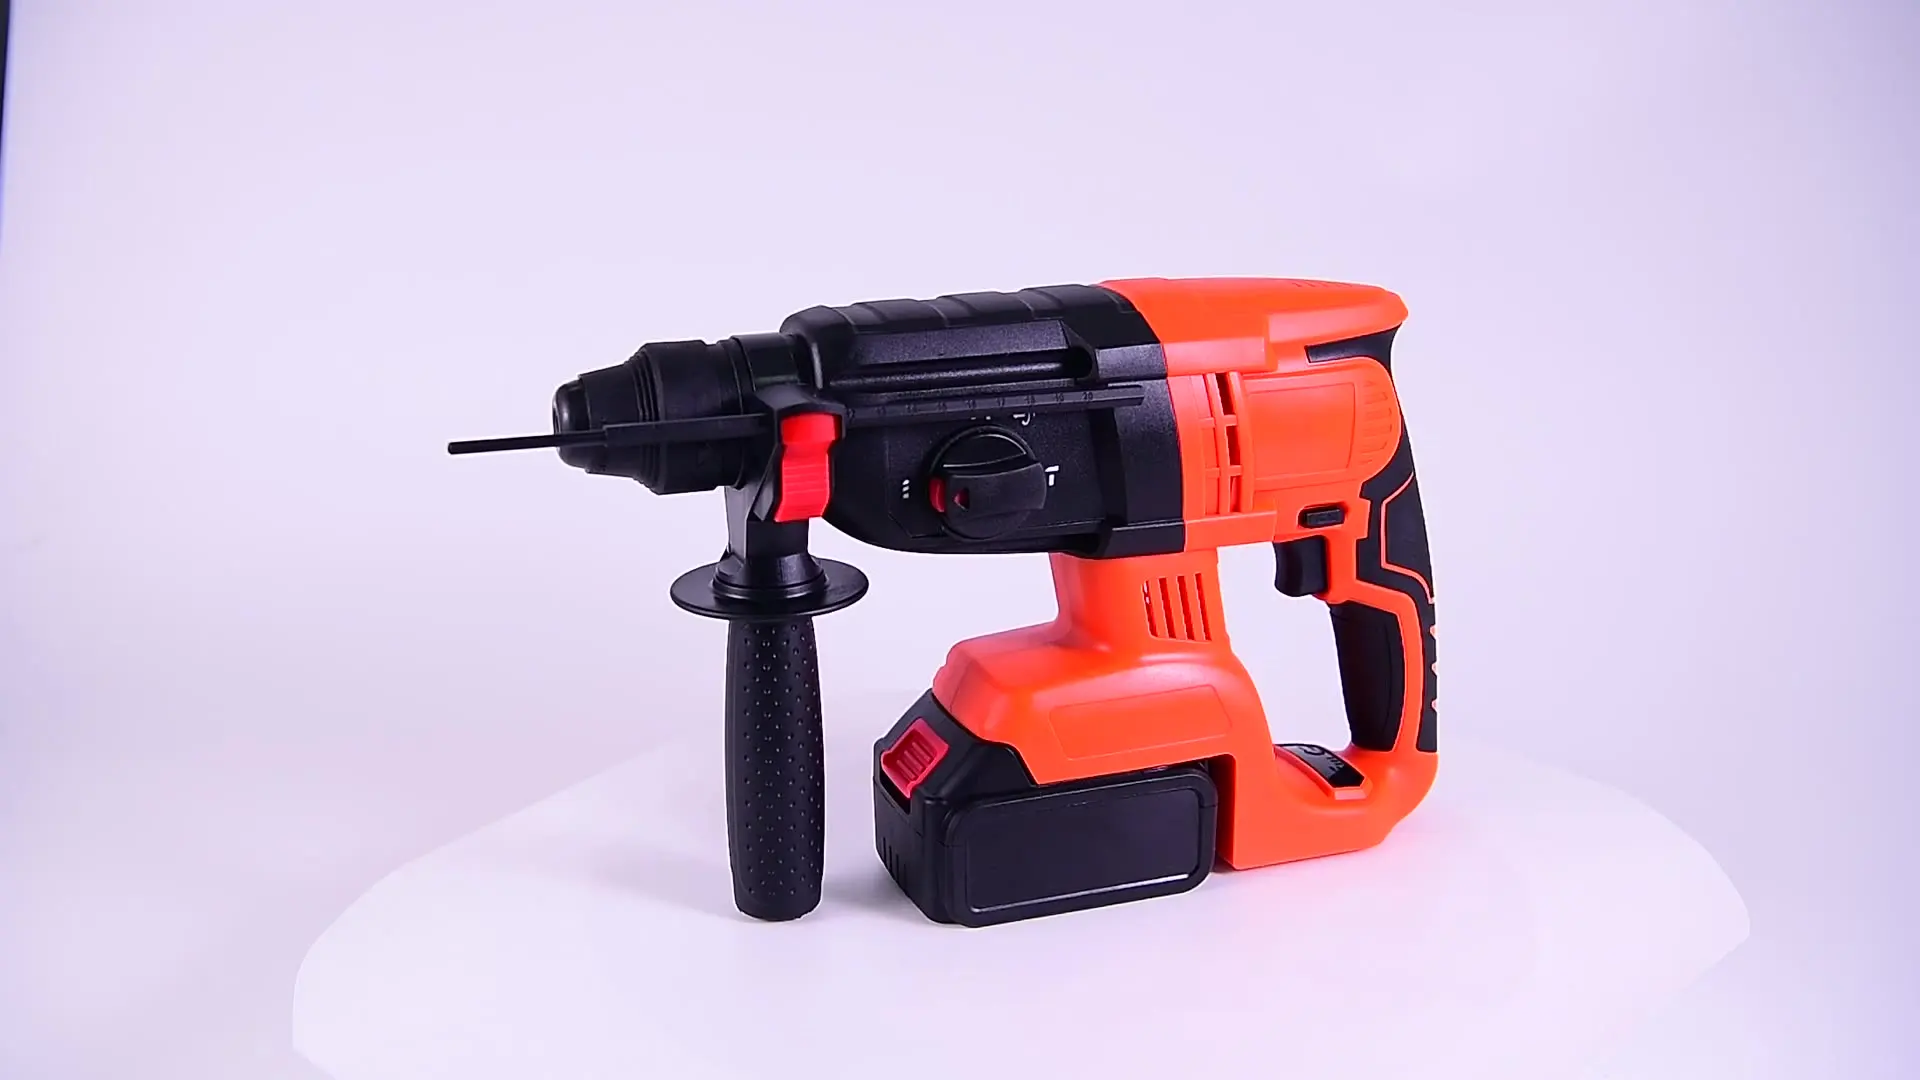 

Cordless Cheap Multi-function Brushless Hilti Drill Bit Rechargeable Li-ion Battery Electric Hammer